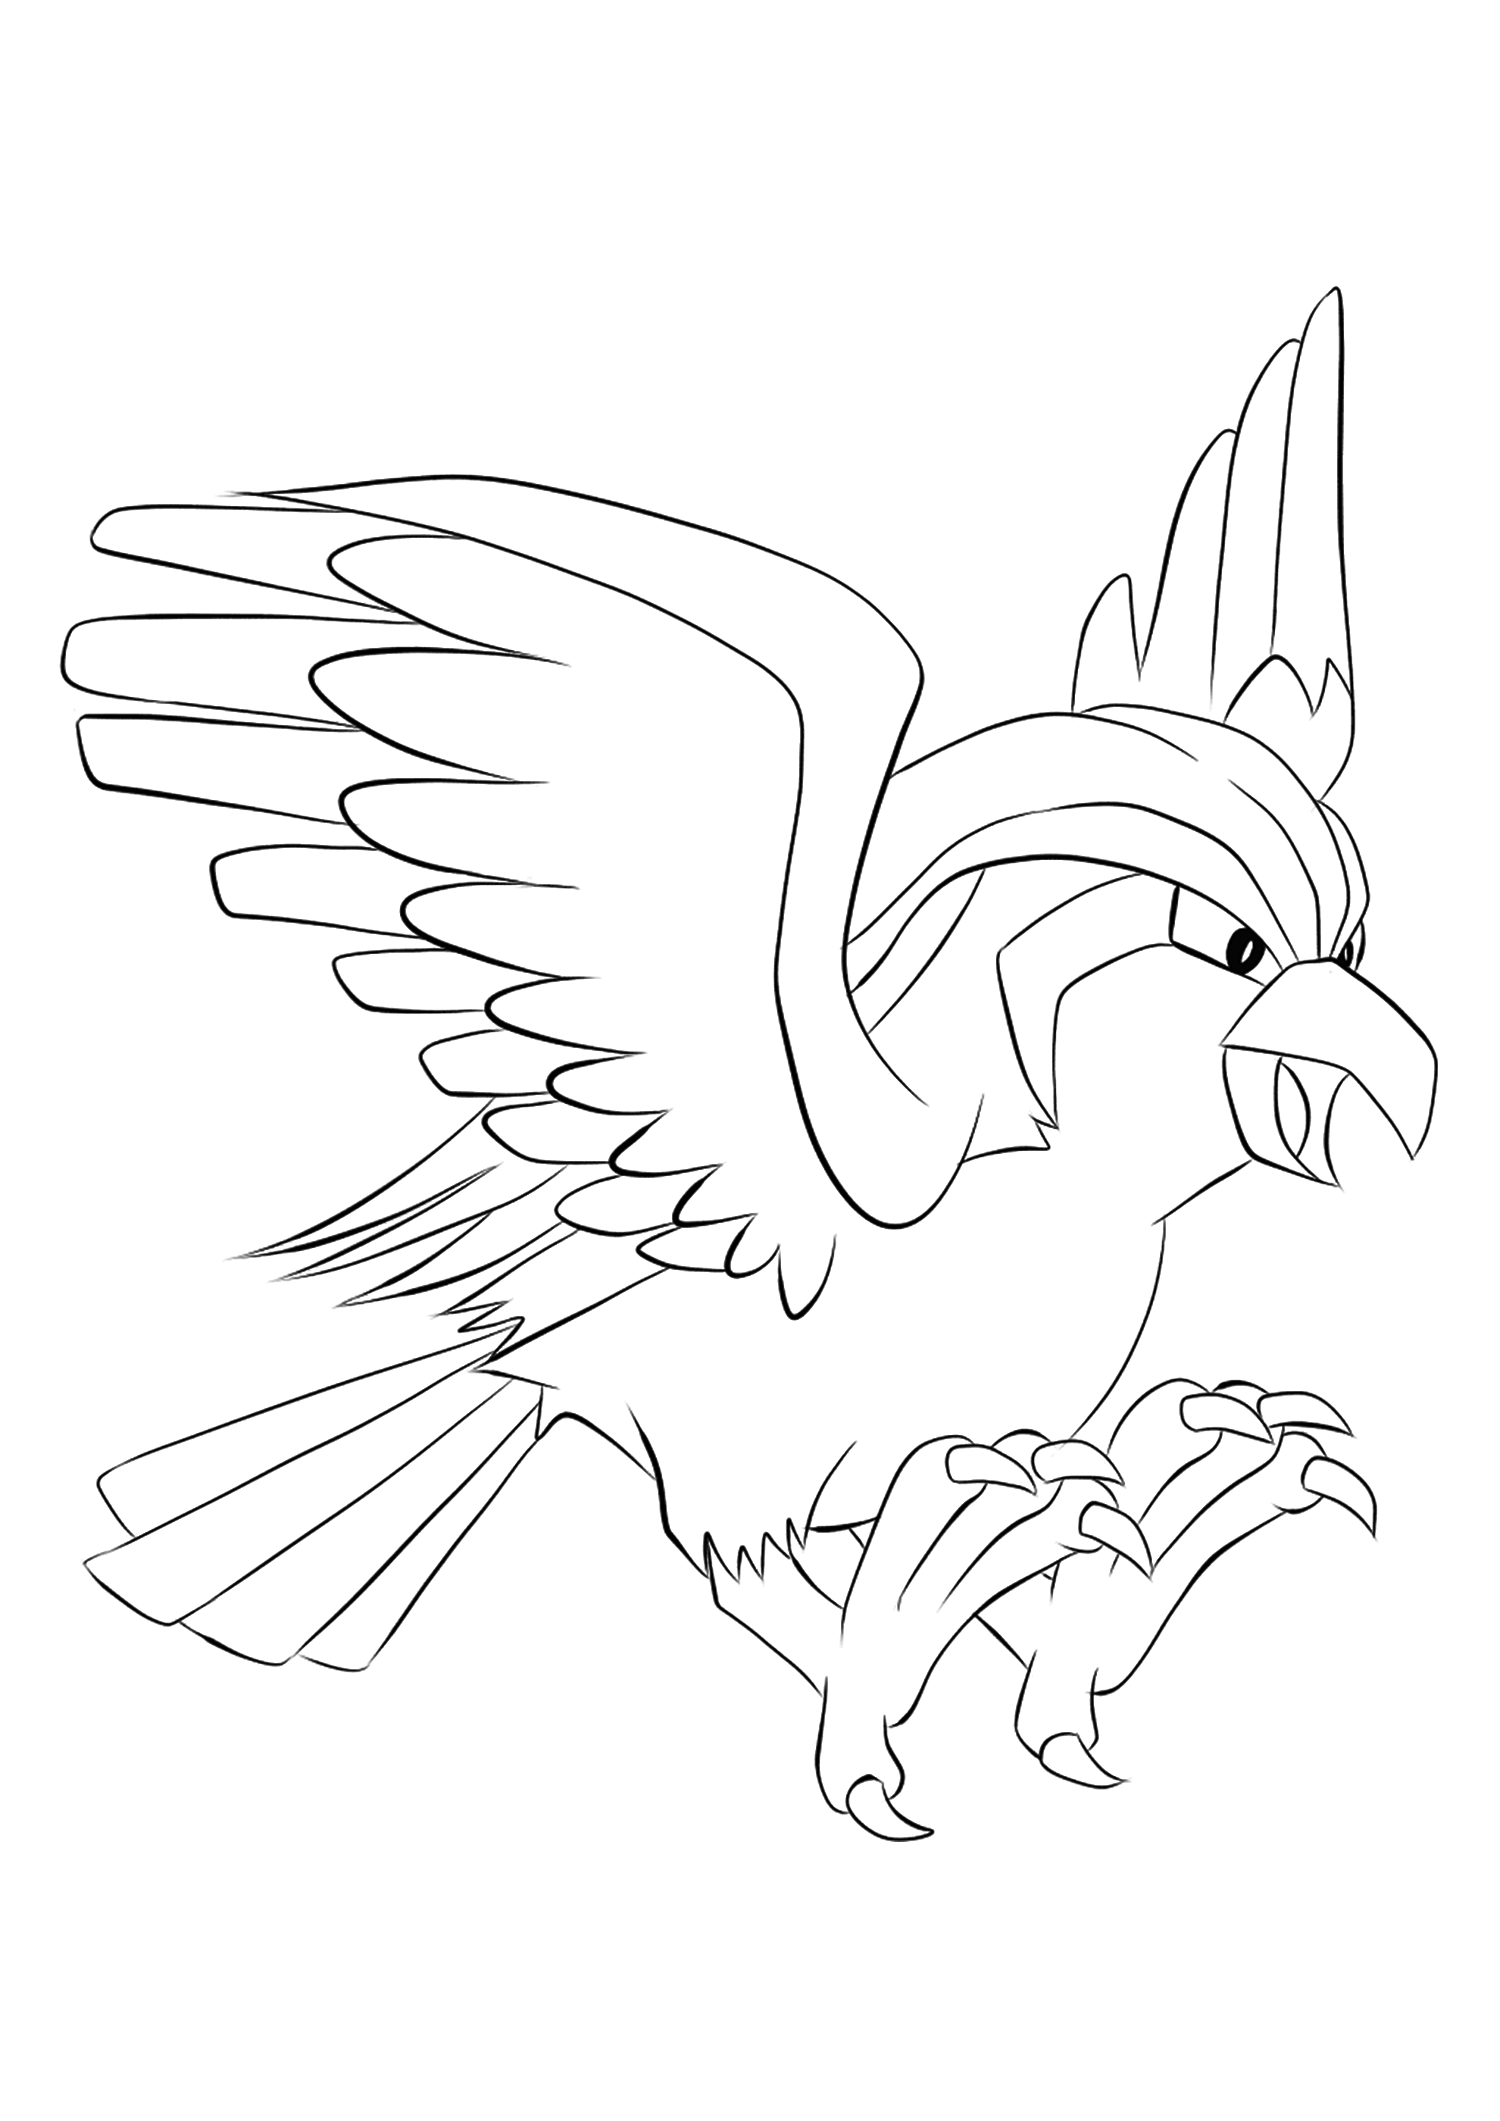 Pidgeot (No.18). Pidgeot Coloring page, Generation I Pokemon of type Normal and FlyingOriginal image credit: Pokemon linearts by Lilly Gerbil'font-size:smaller;color:gray'>Permission: All rights reserved © Pokemon company and Ken Sugimori.